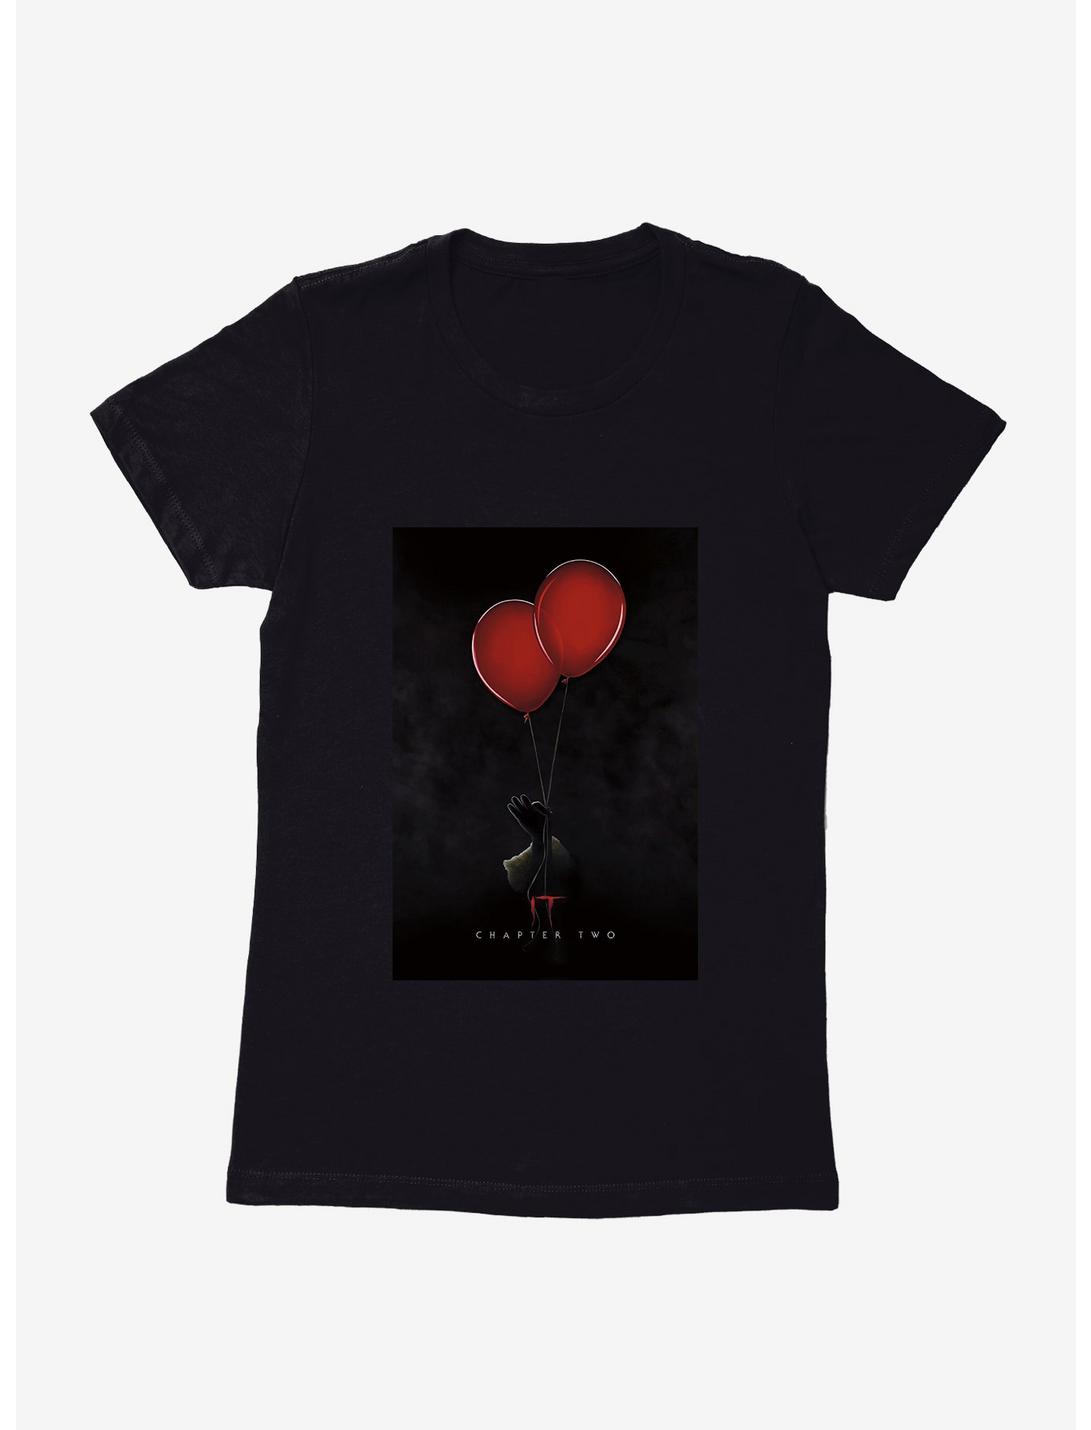 IT Chapter Two Red Balloons Poster Womens T-Shirt, BLACK, hi-res